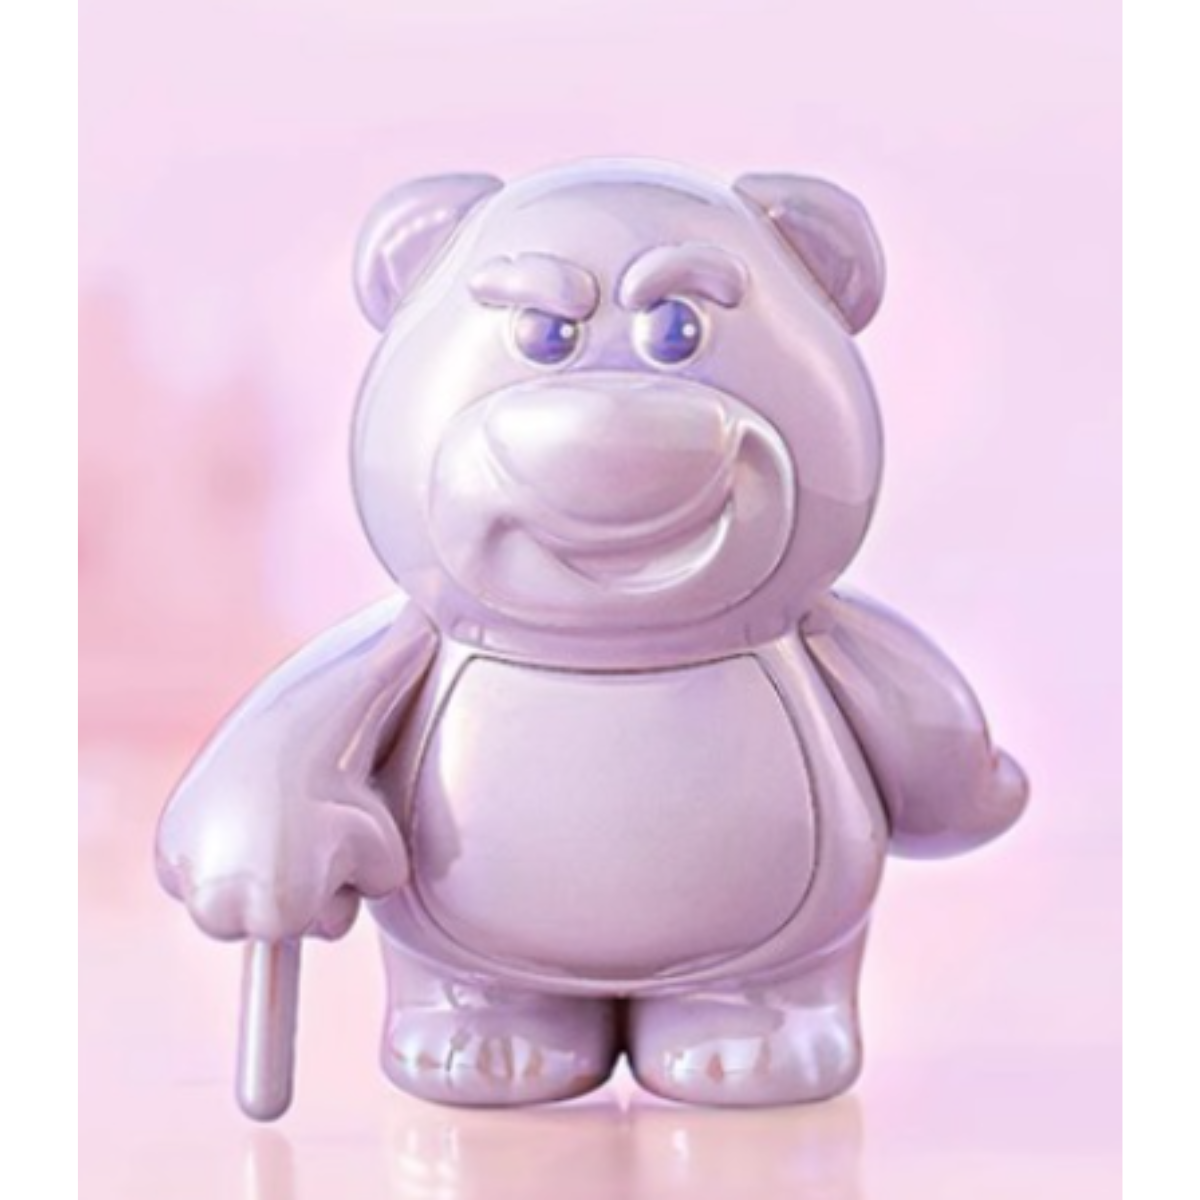 Miniso x Disney Lotso Ever-Changing Series-Single Box (Random)-Miniso-Ace Cards &amp; Collectibles